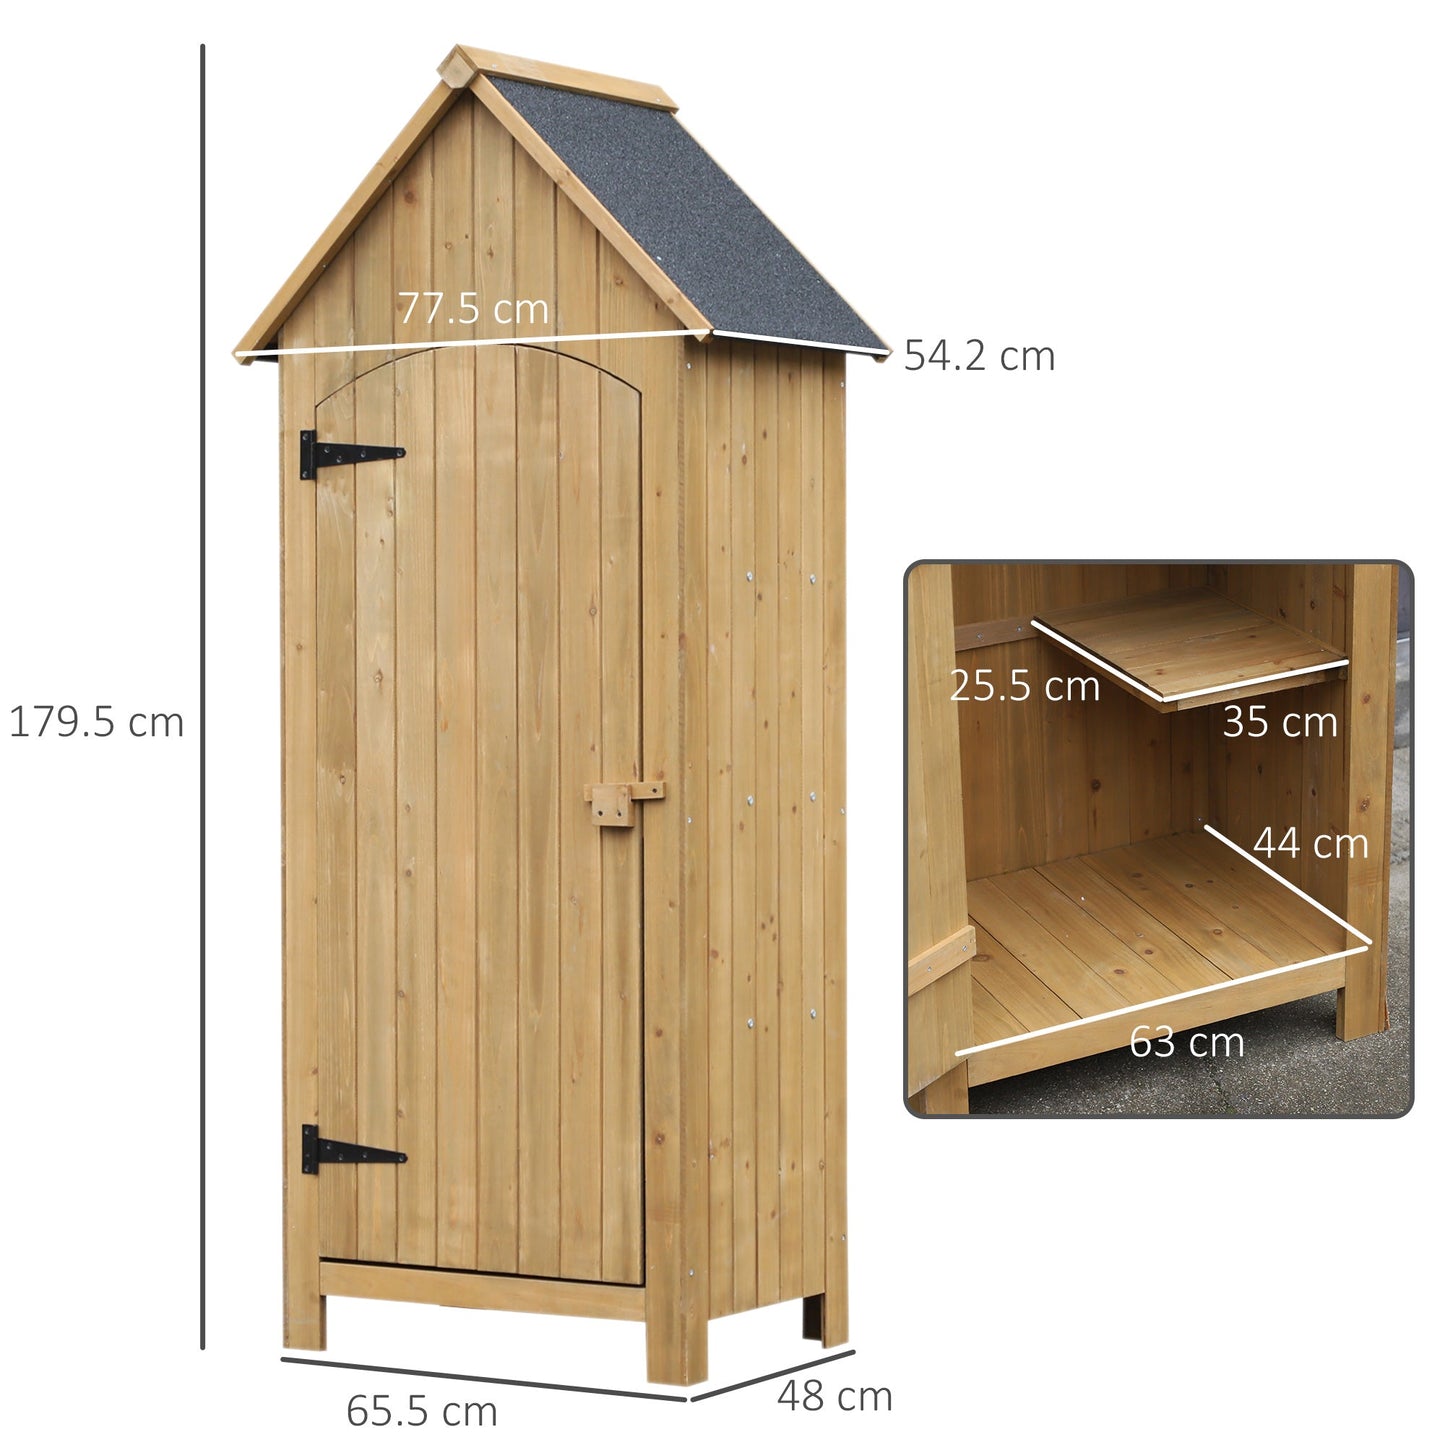 Outsunny house holder wooden tools, waterproof with doors and shelves